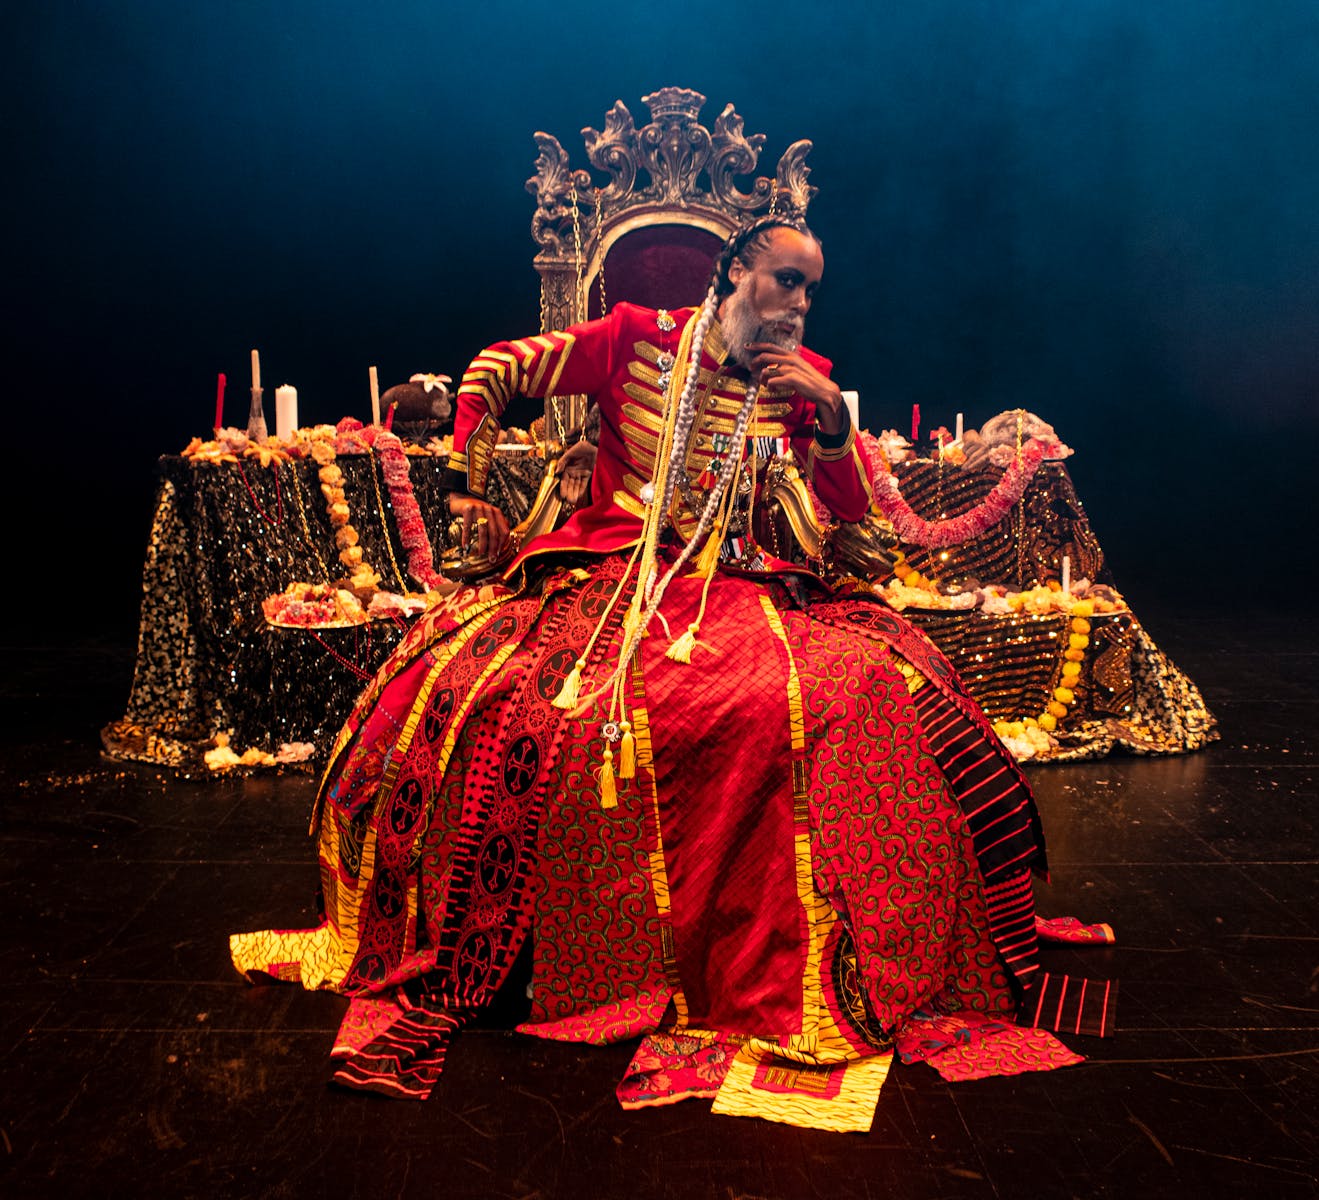 Person wearing large red uniform/dress sitting on throne on dark stage